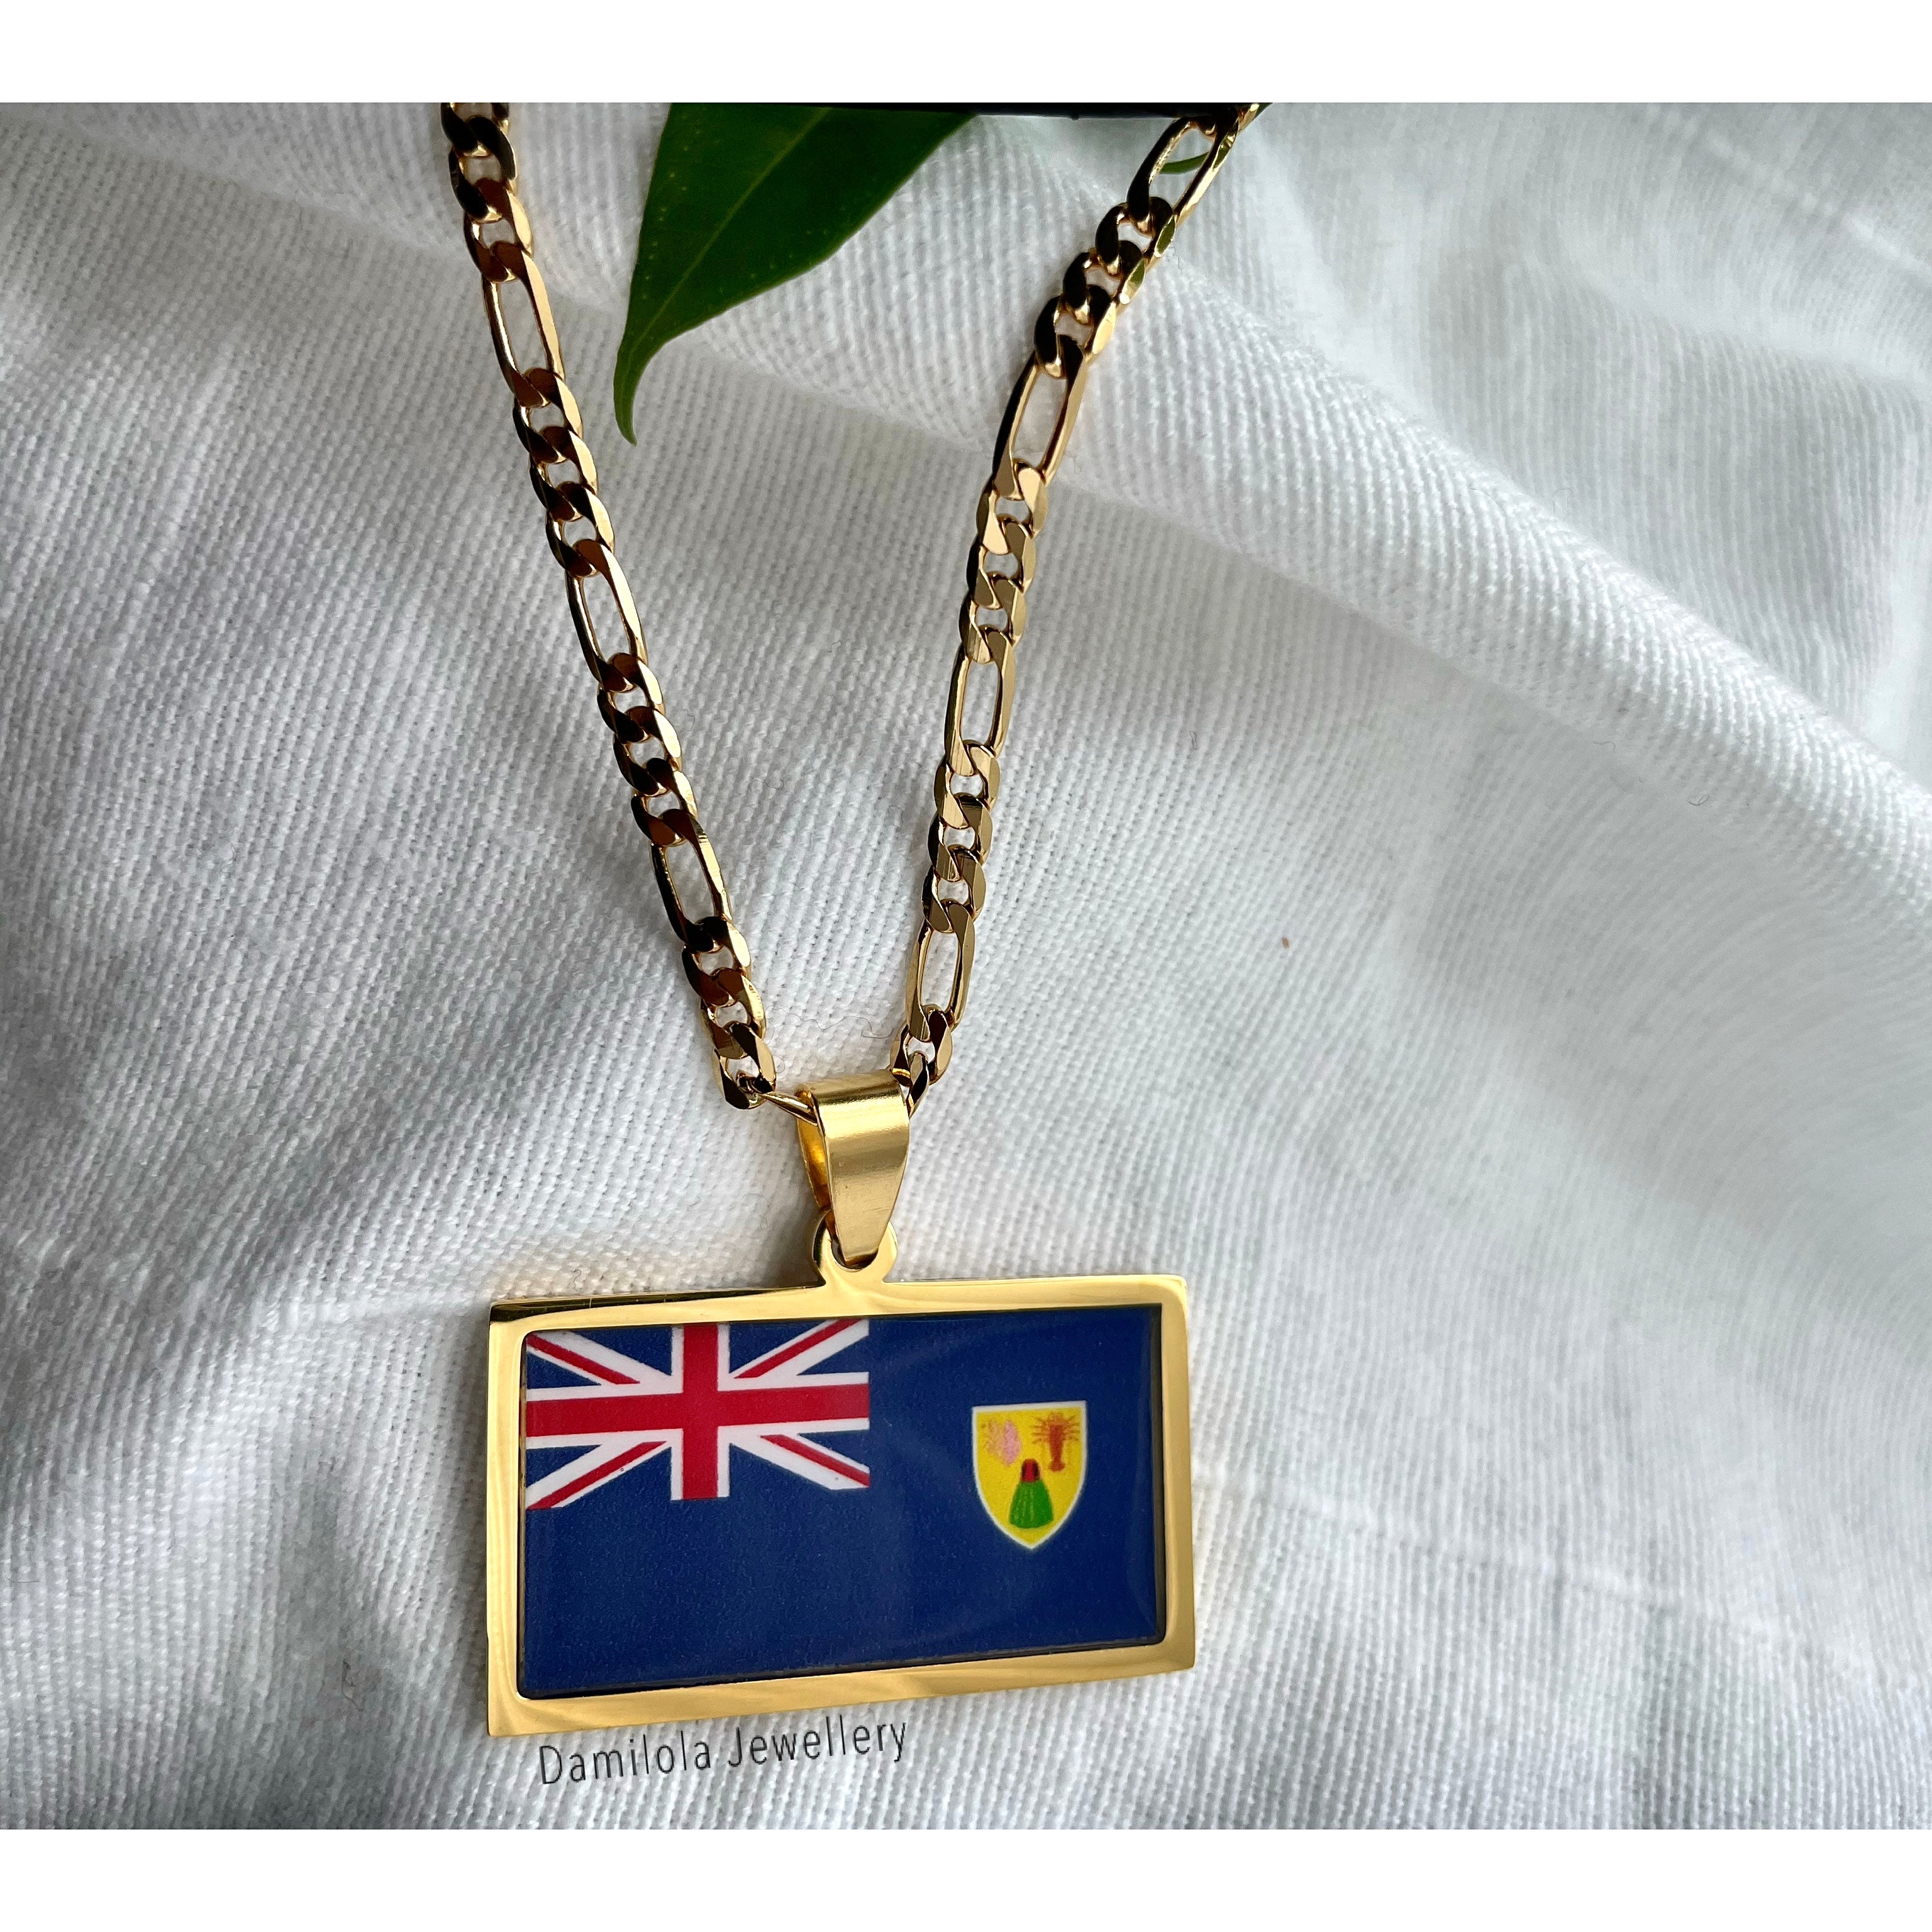 Turks and Caicos Flag Necklace 🇹🇨